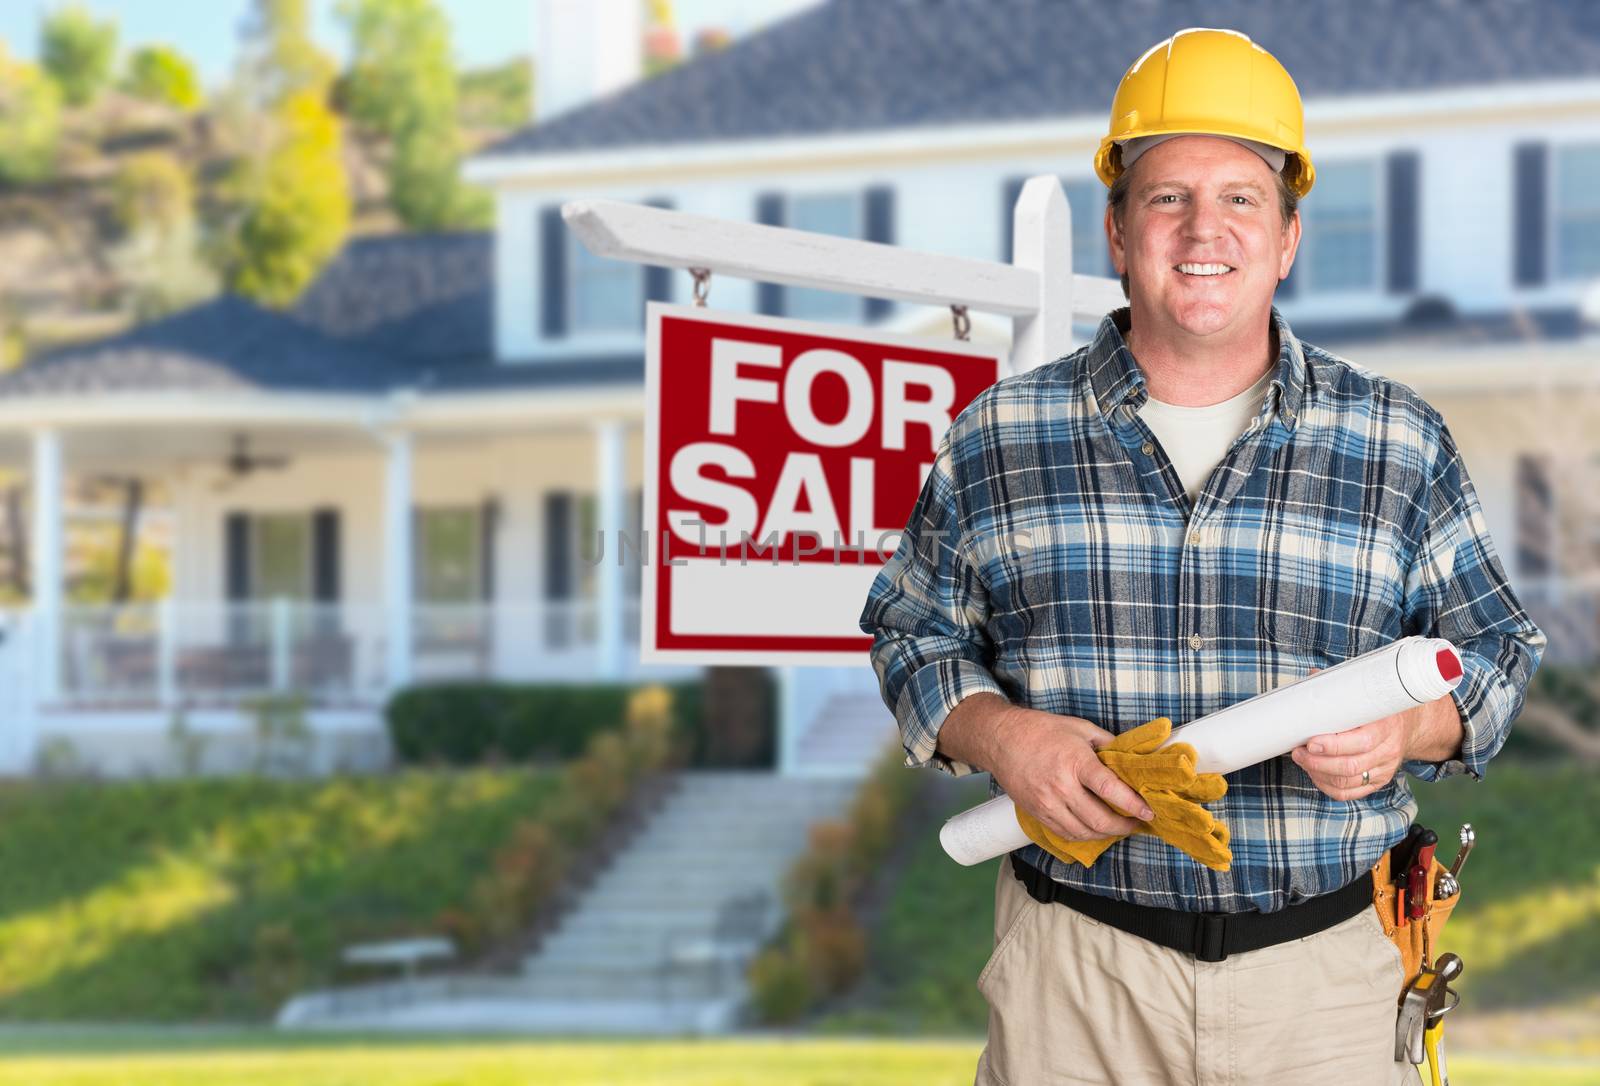 Contractor With Plans and Hard Hat In Front of For Sale Real Estate Sign and House.